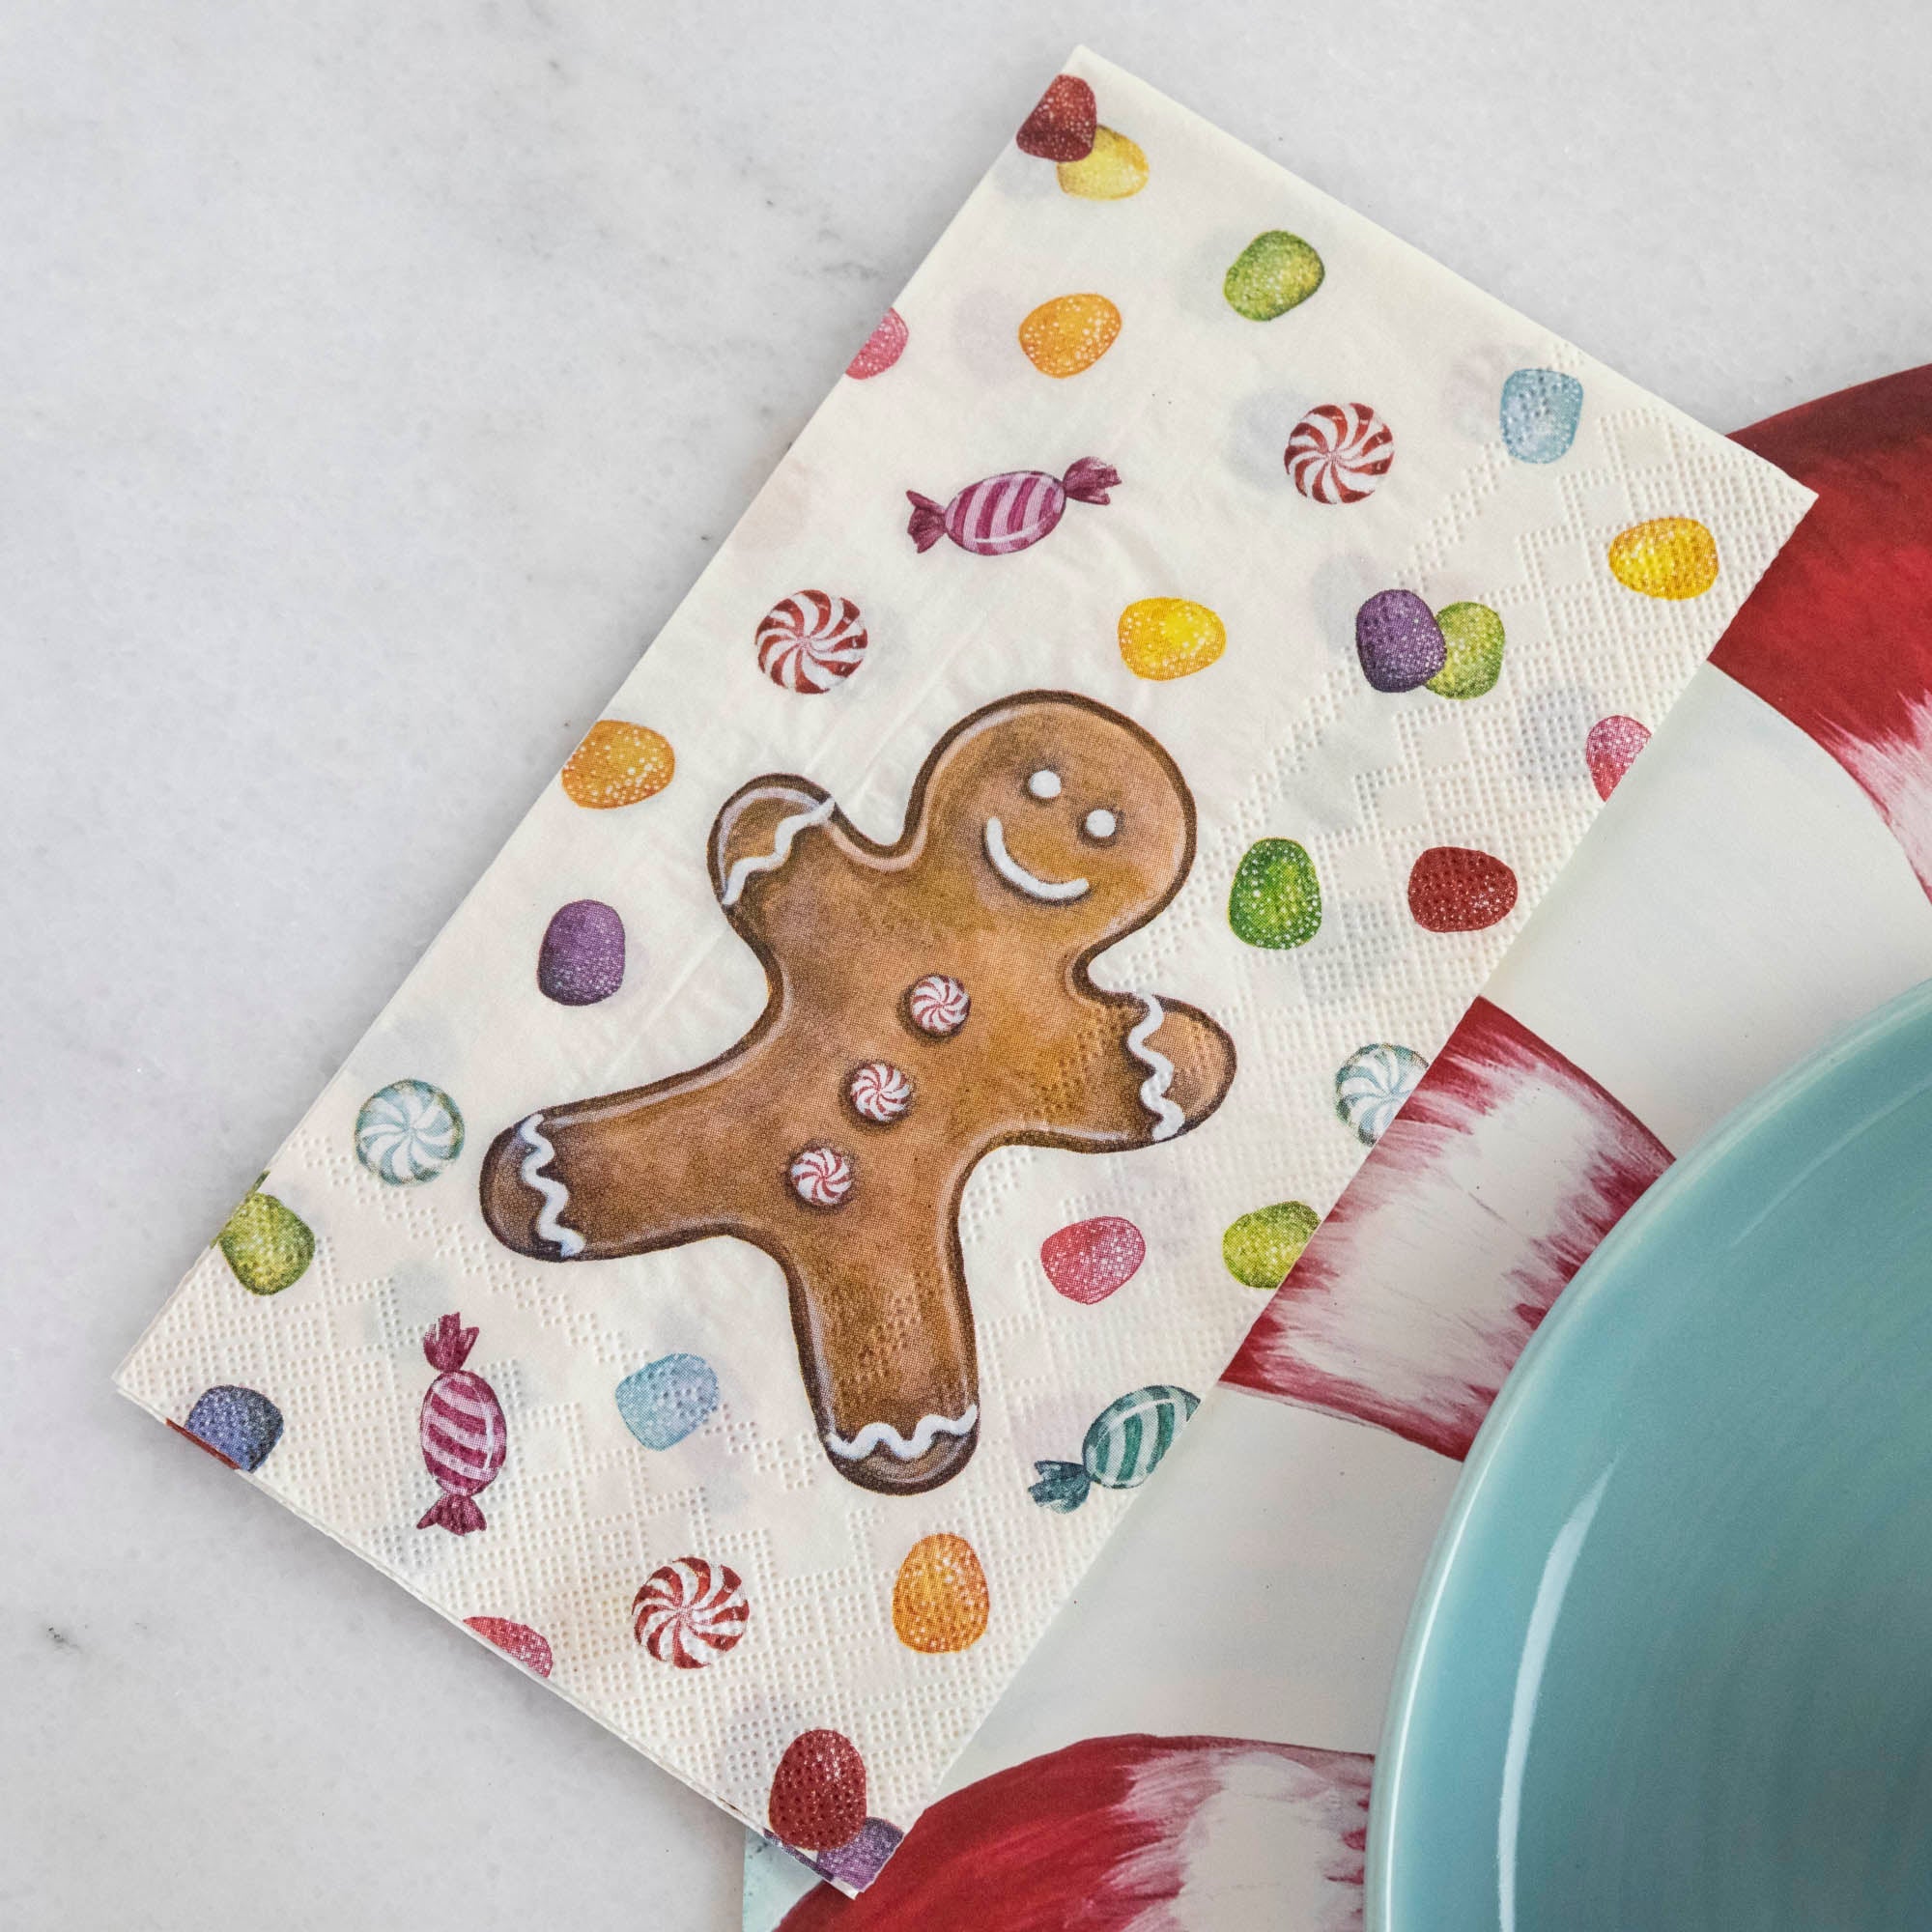 A Gingerbread Guest Napkin next to a plate in a Christmas candy-themed place setting.